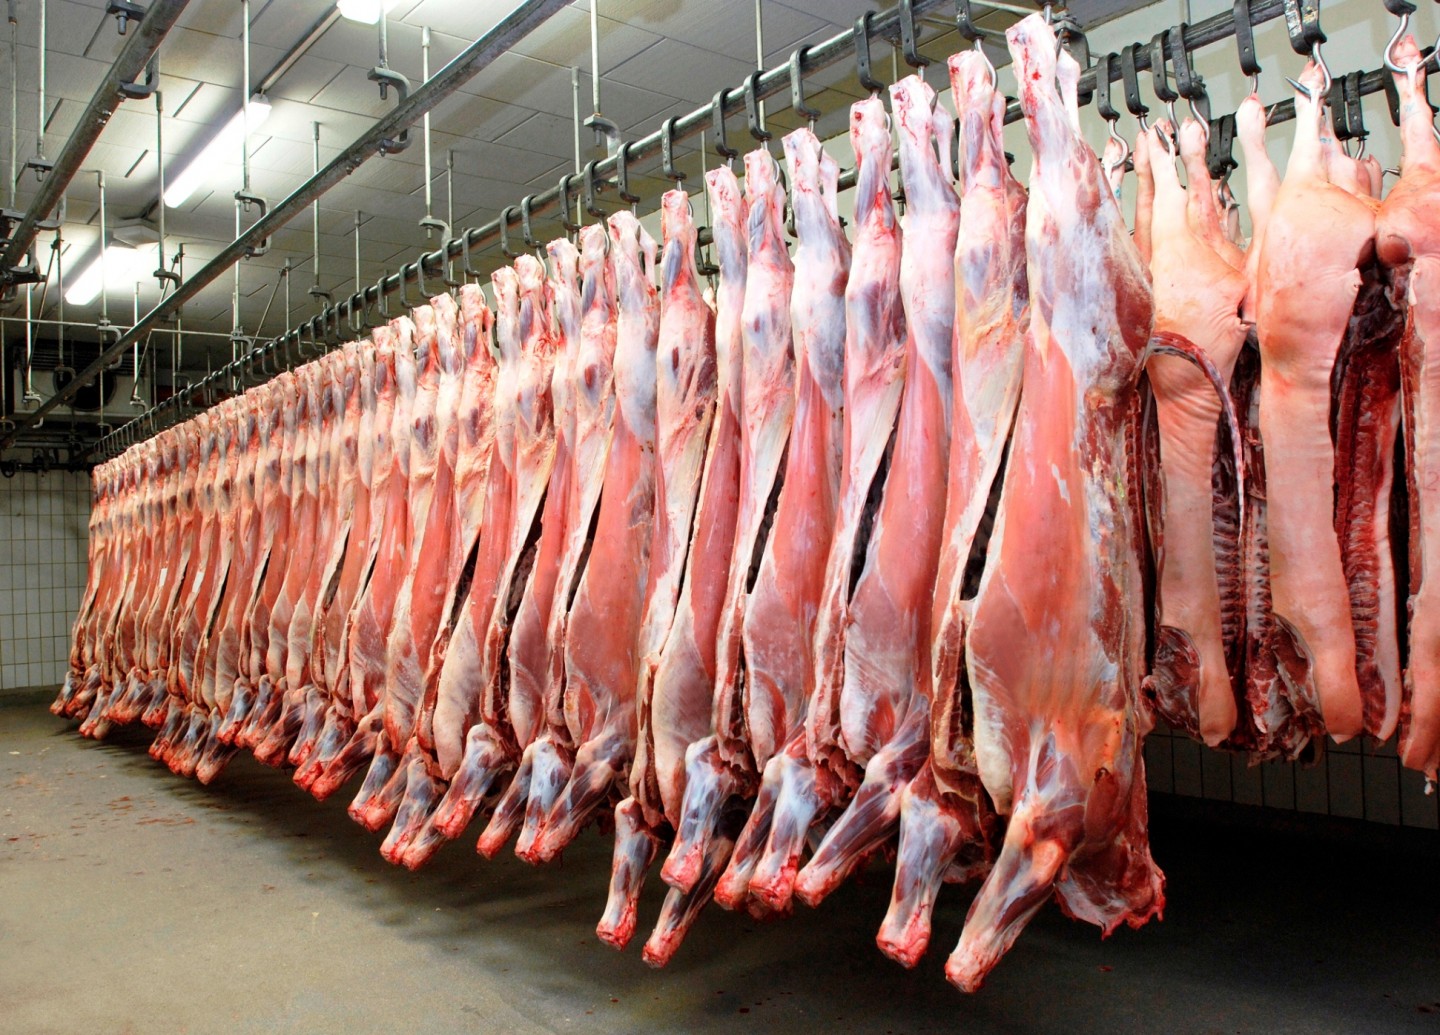 Pig carcasses in a slaughterhouse